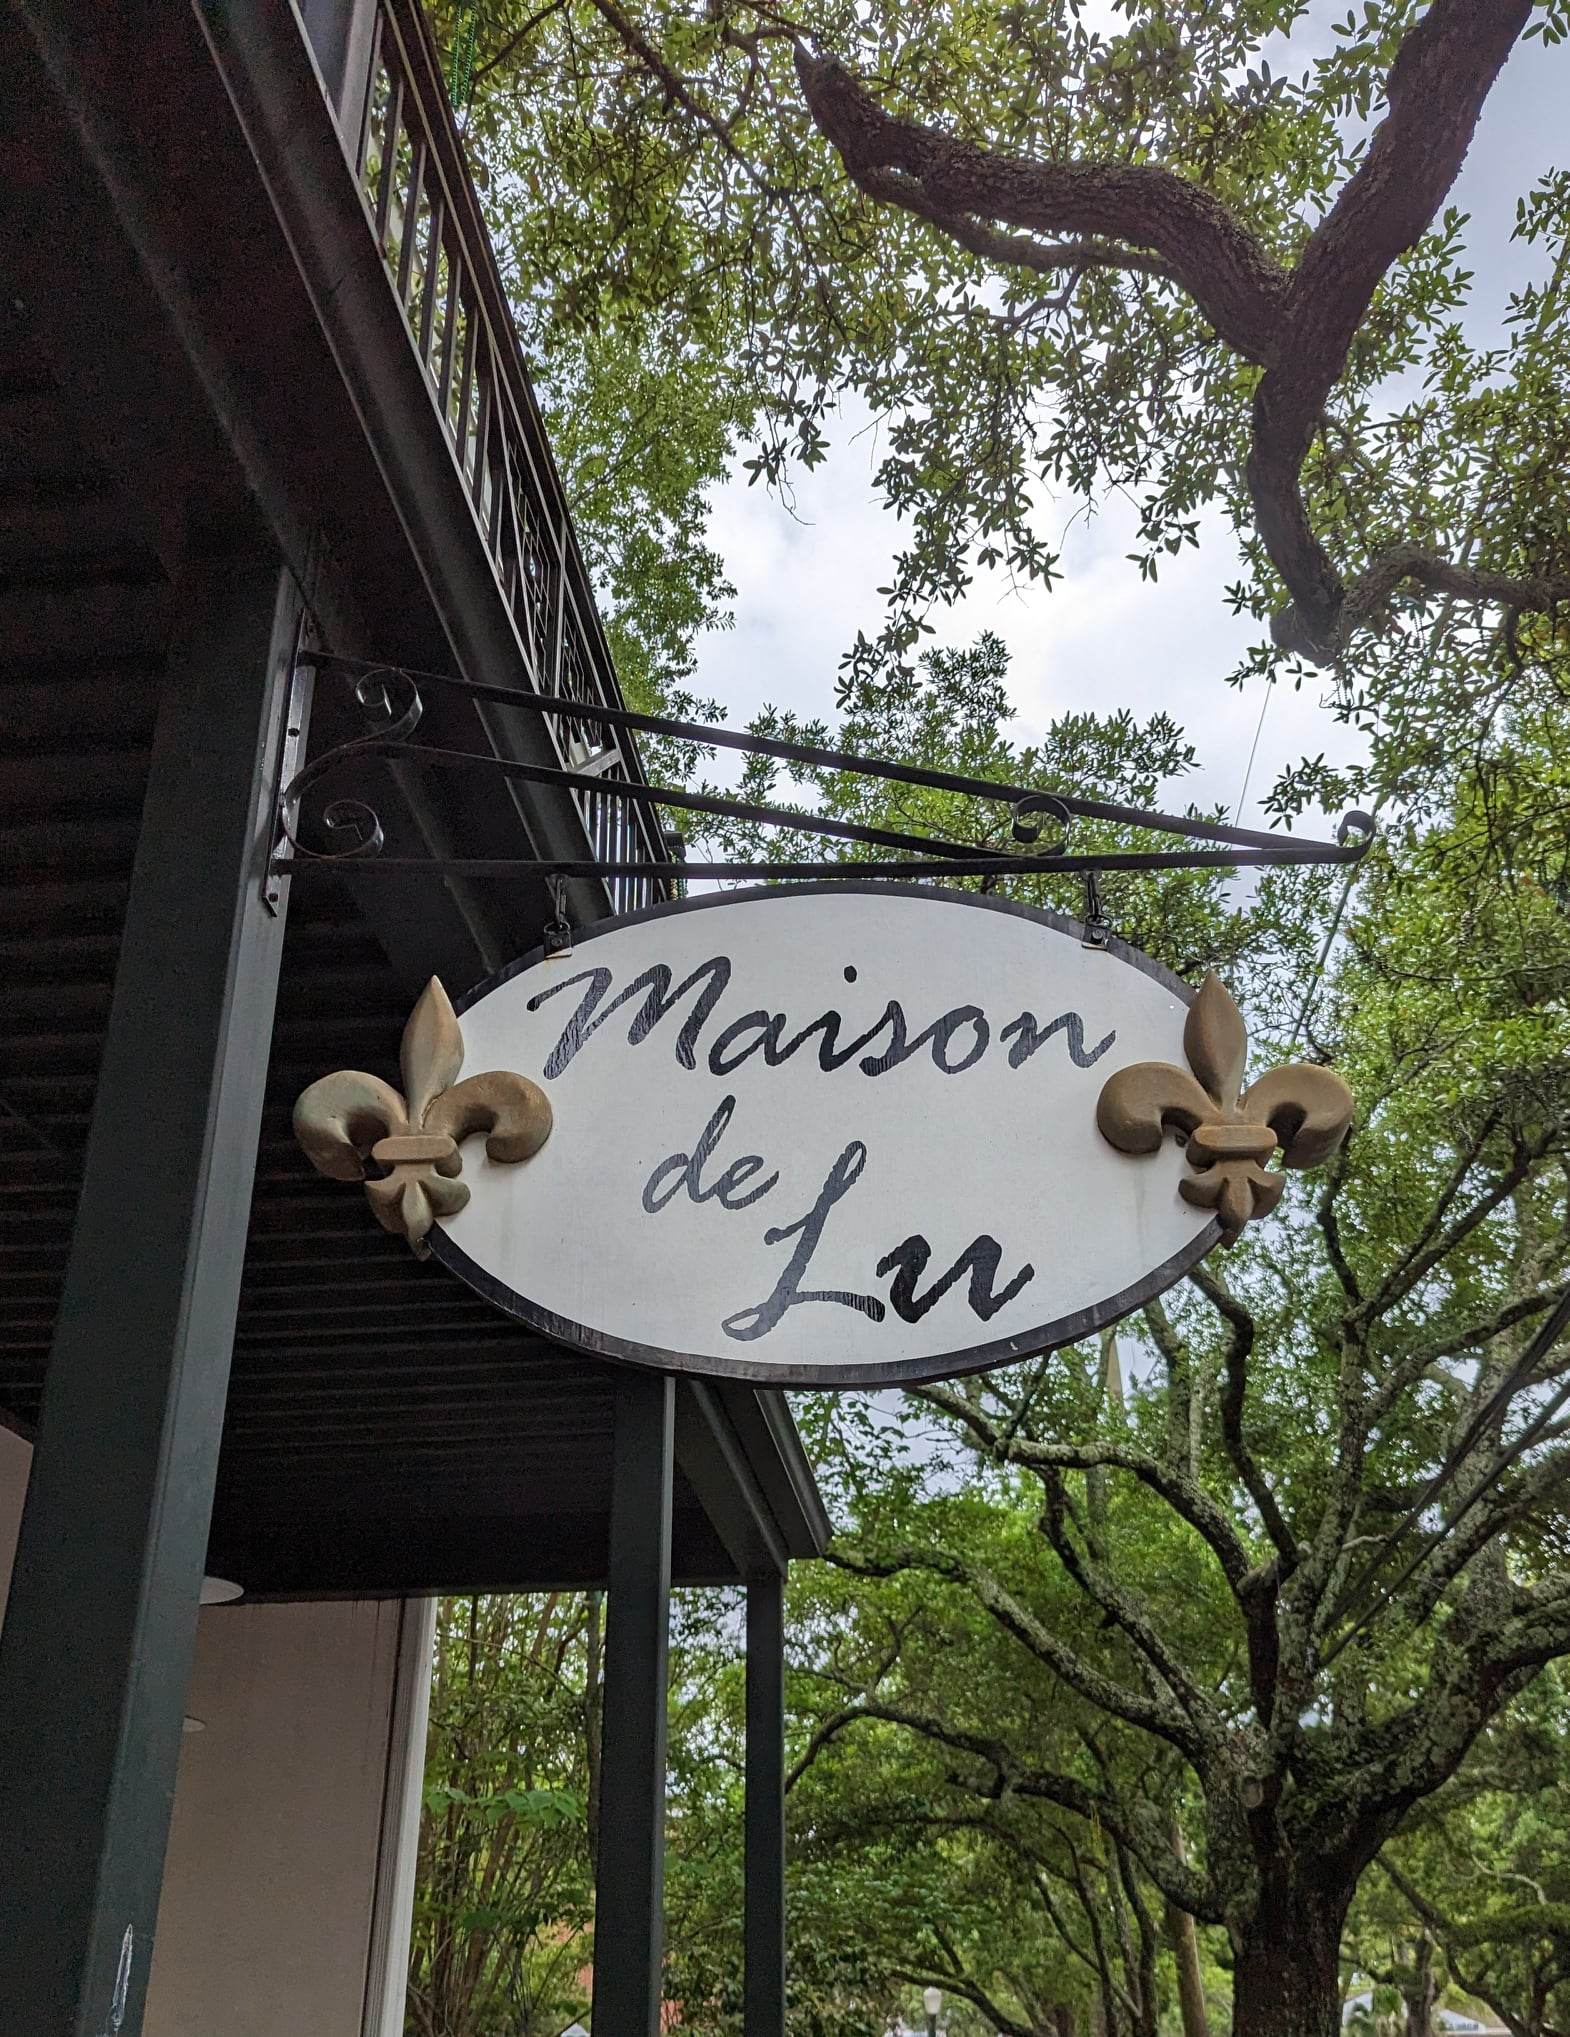 Maison de Lu is one of the best restaurants in the Mississippi Gulf Coast located in downtown Ocean Springs